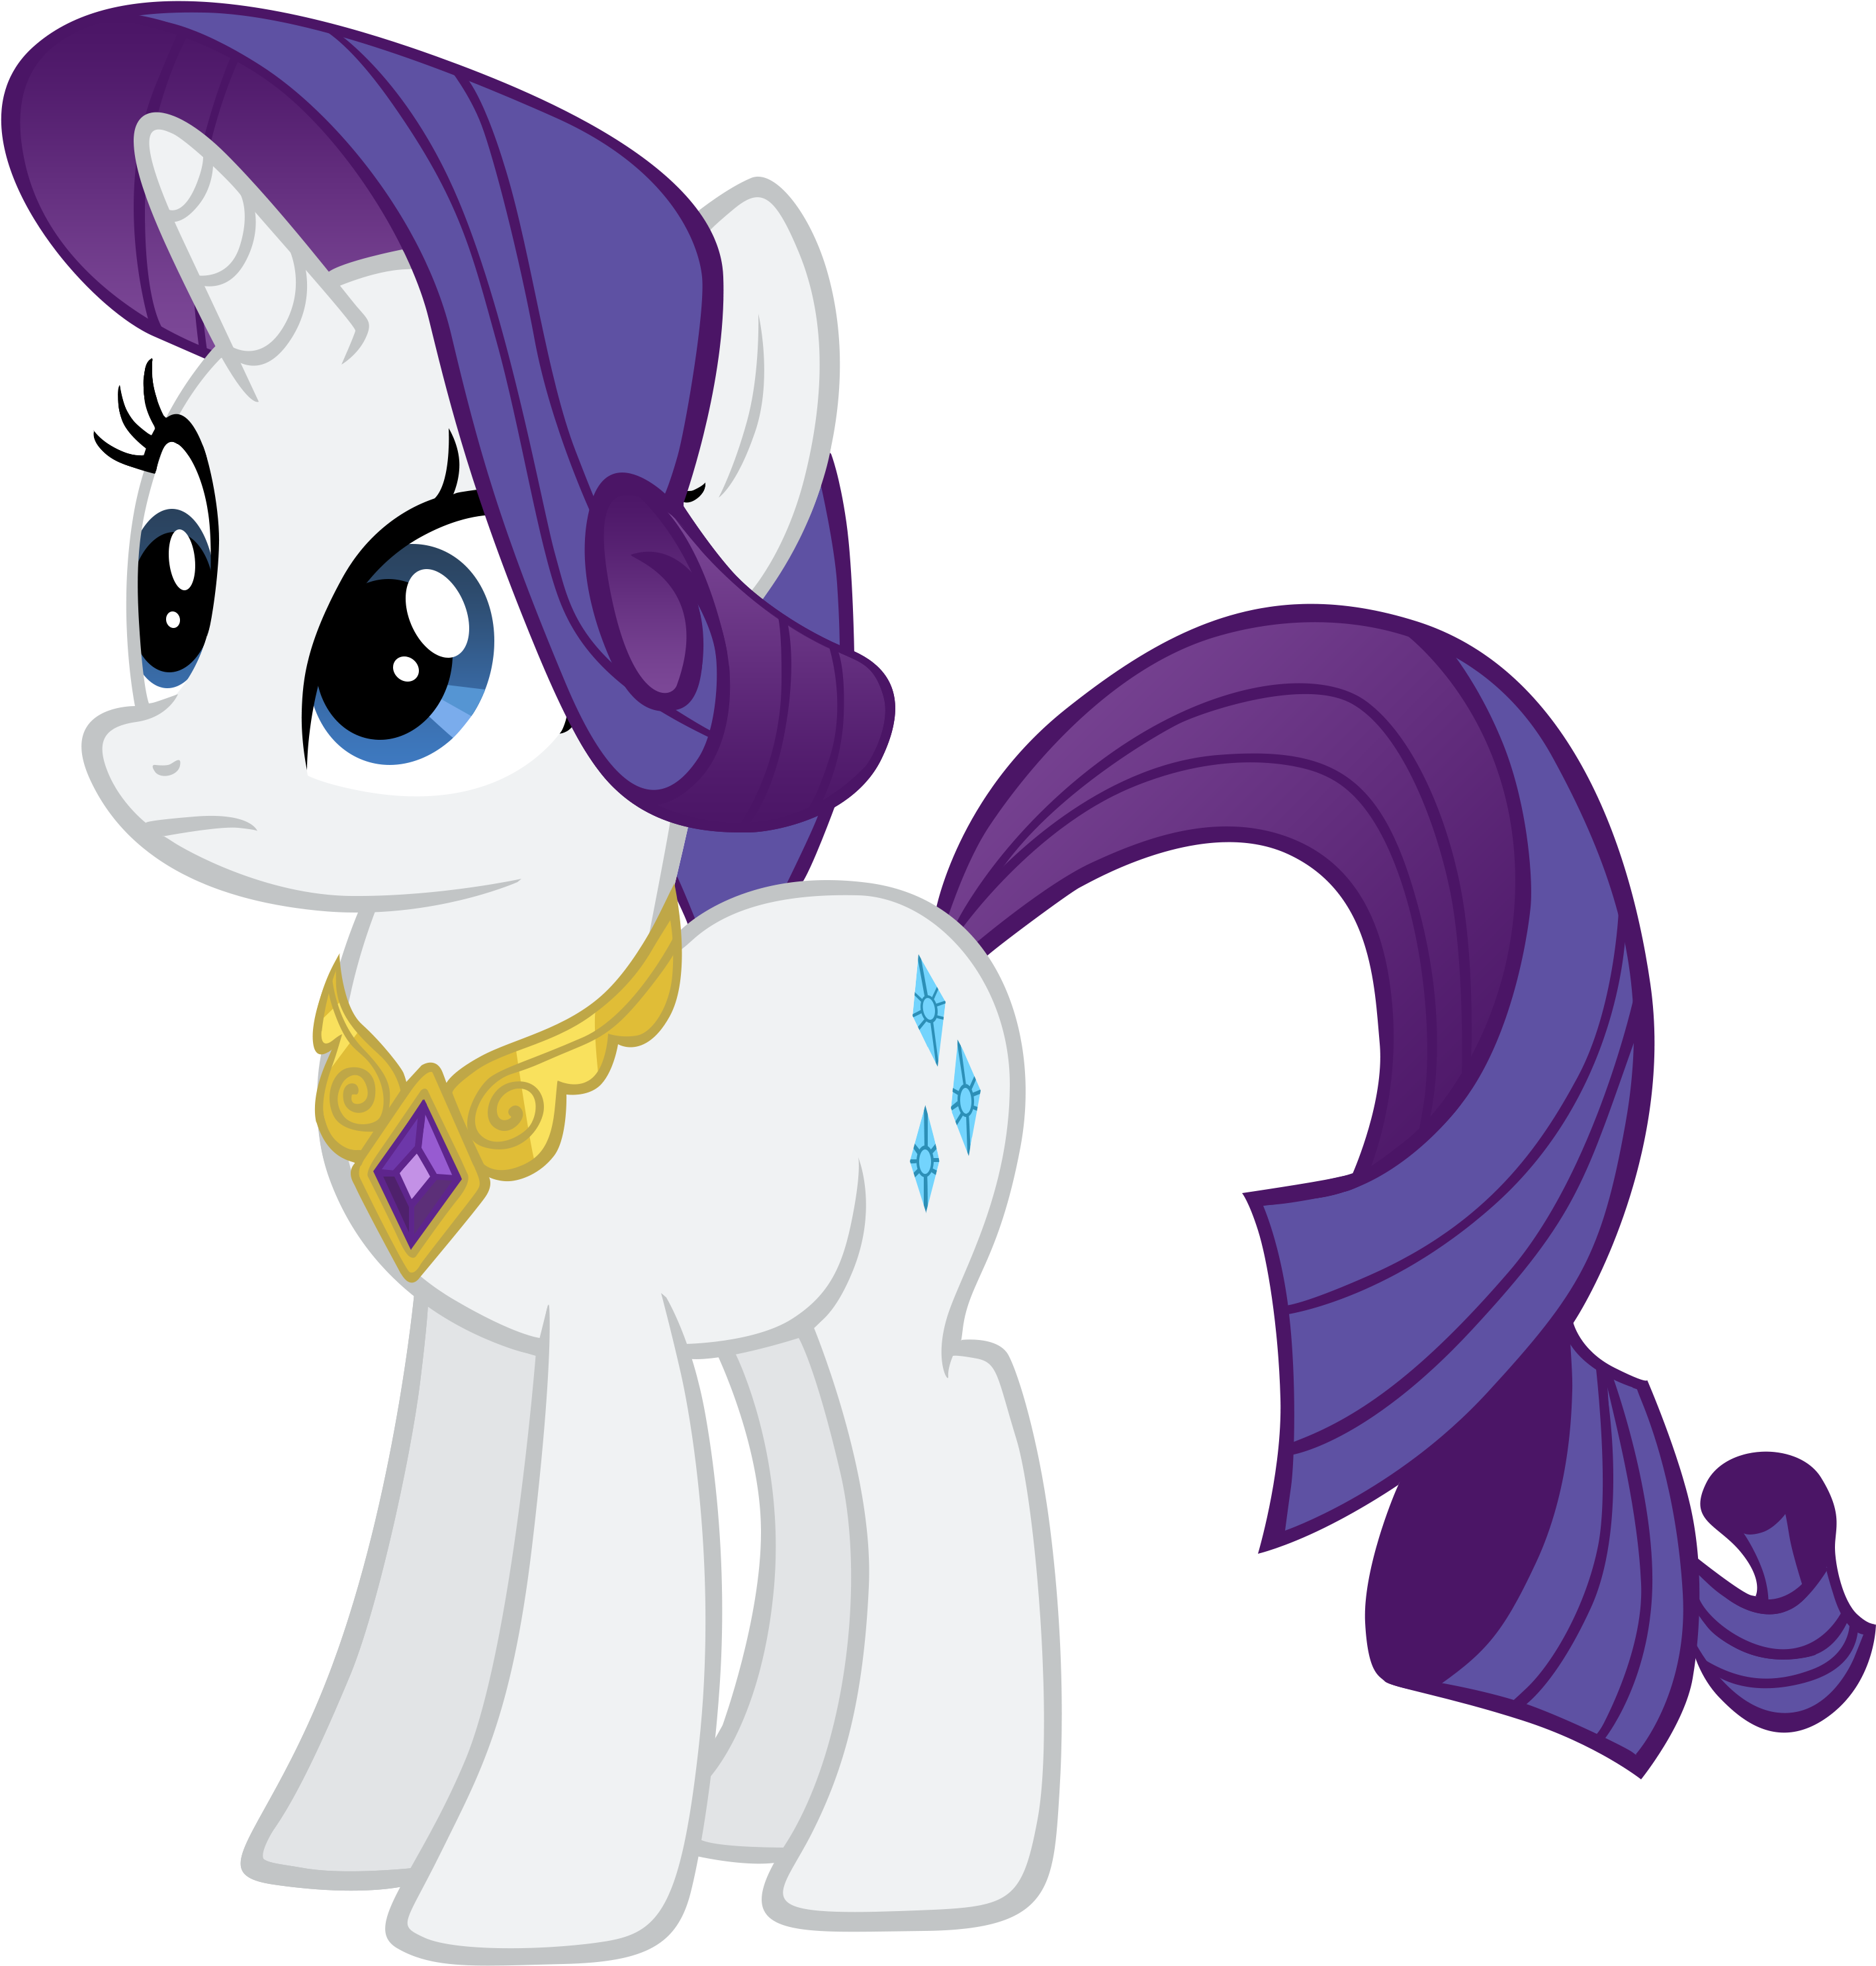 Download Rarity The Unicorn Image Rarity Vectors HD Wallpaper Little Pony Rarity Element Size PNG Image